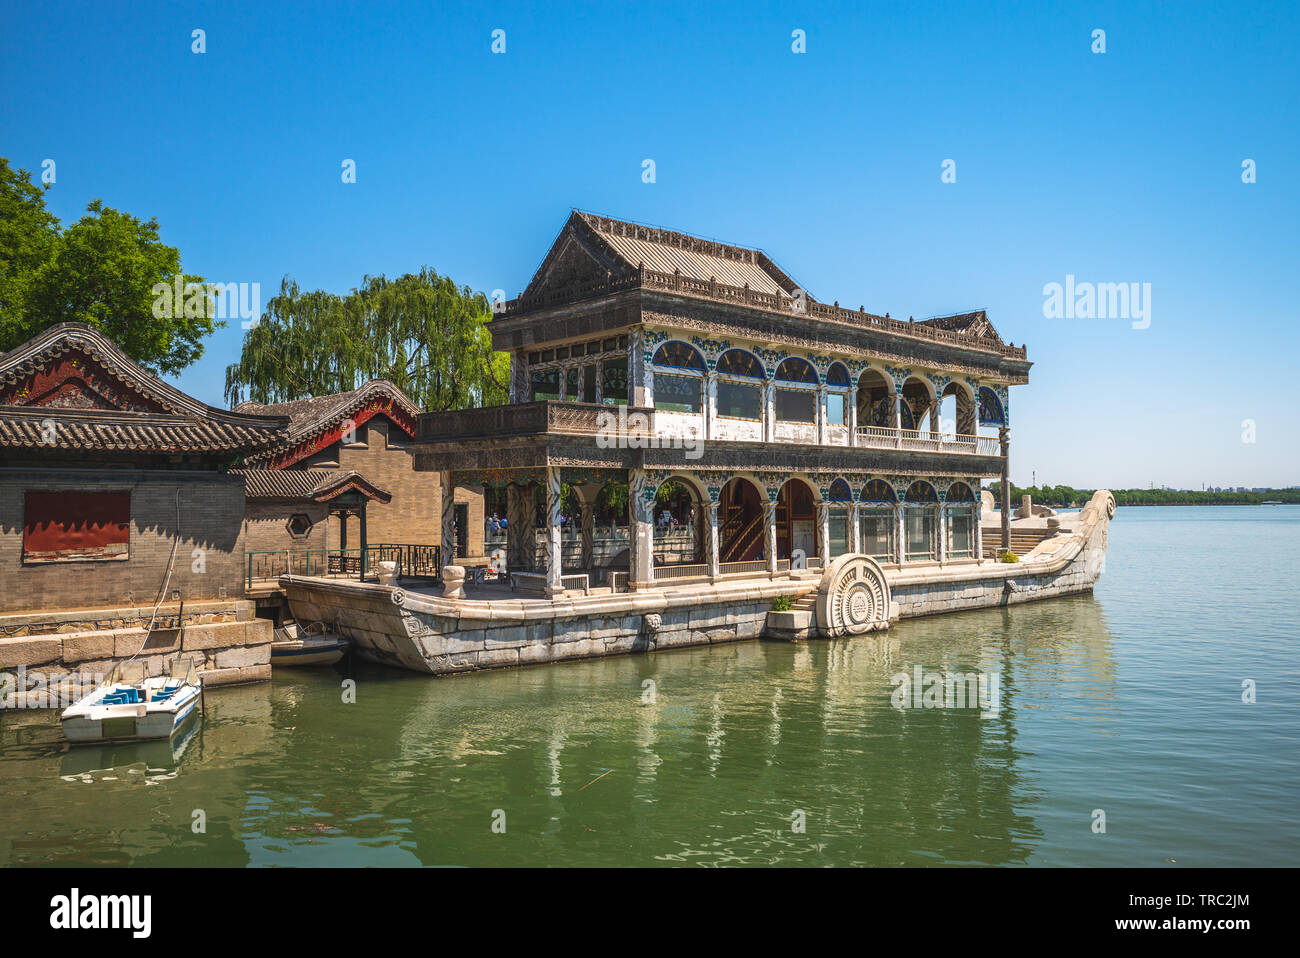 Boat of Purity and Ease in Summer Palace, beijing Stock Photo